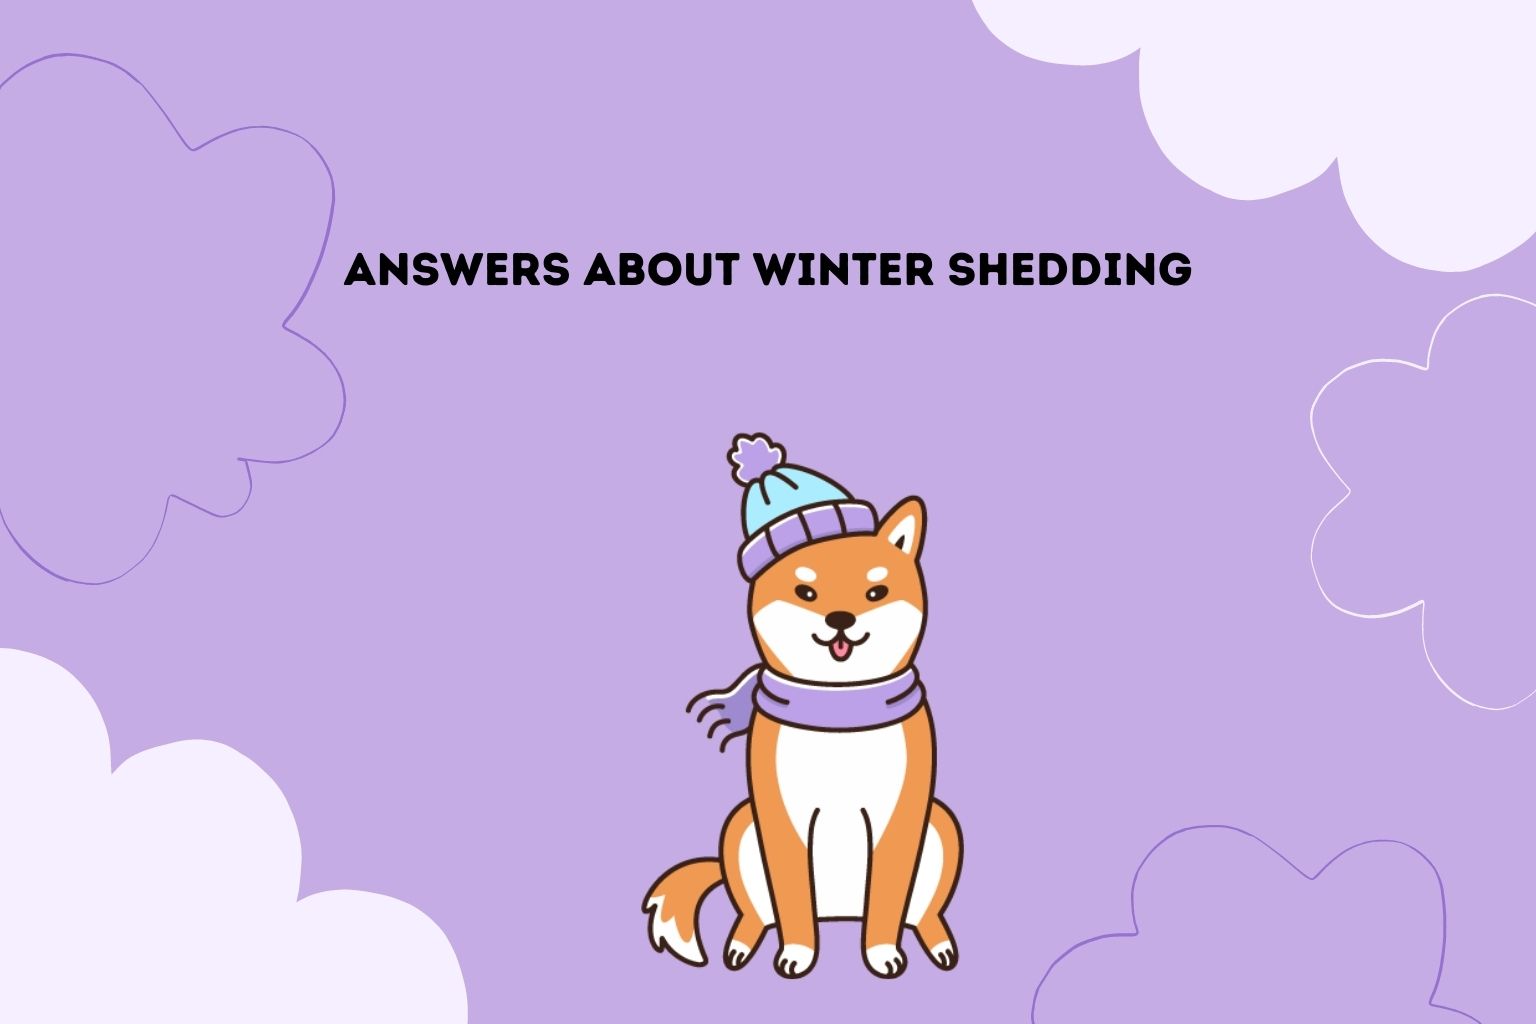 Answers about Winter Shedding